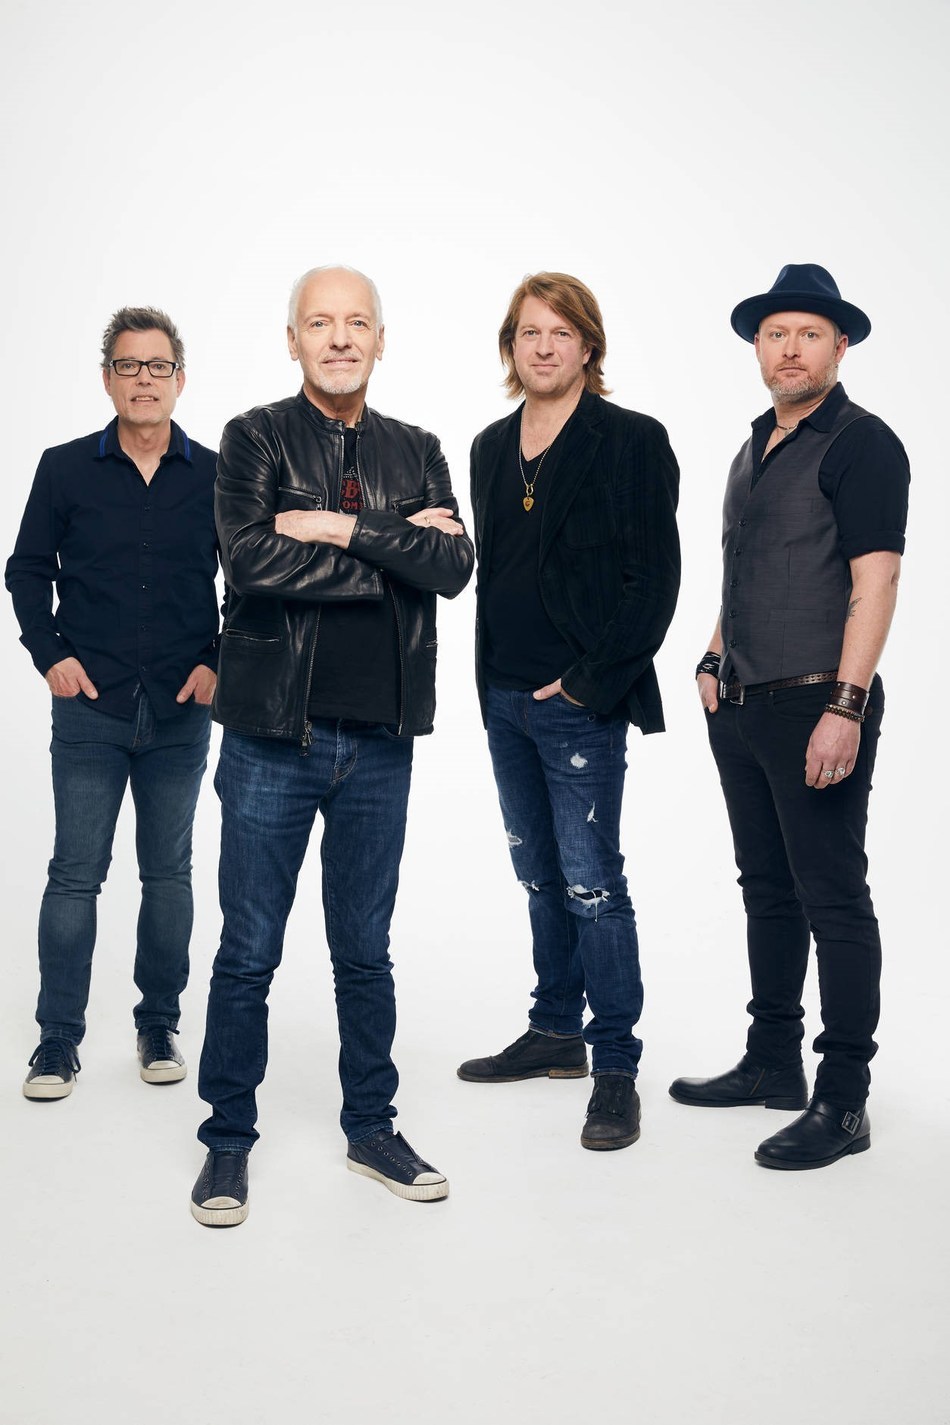 Peter Frampton Band's new album 'All Blues' was released today, June 7 via UMe.